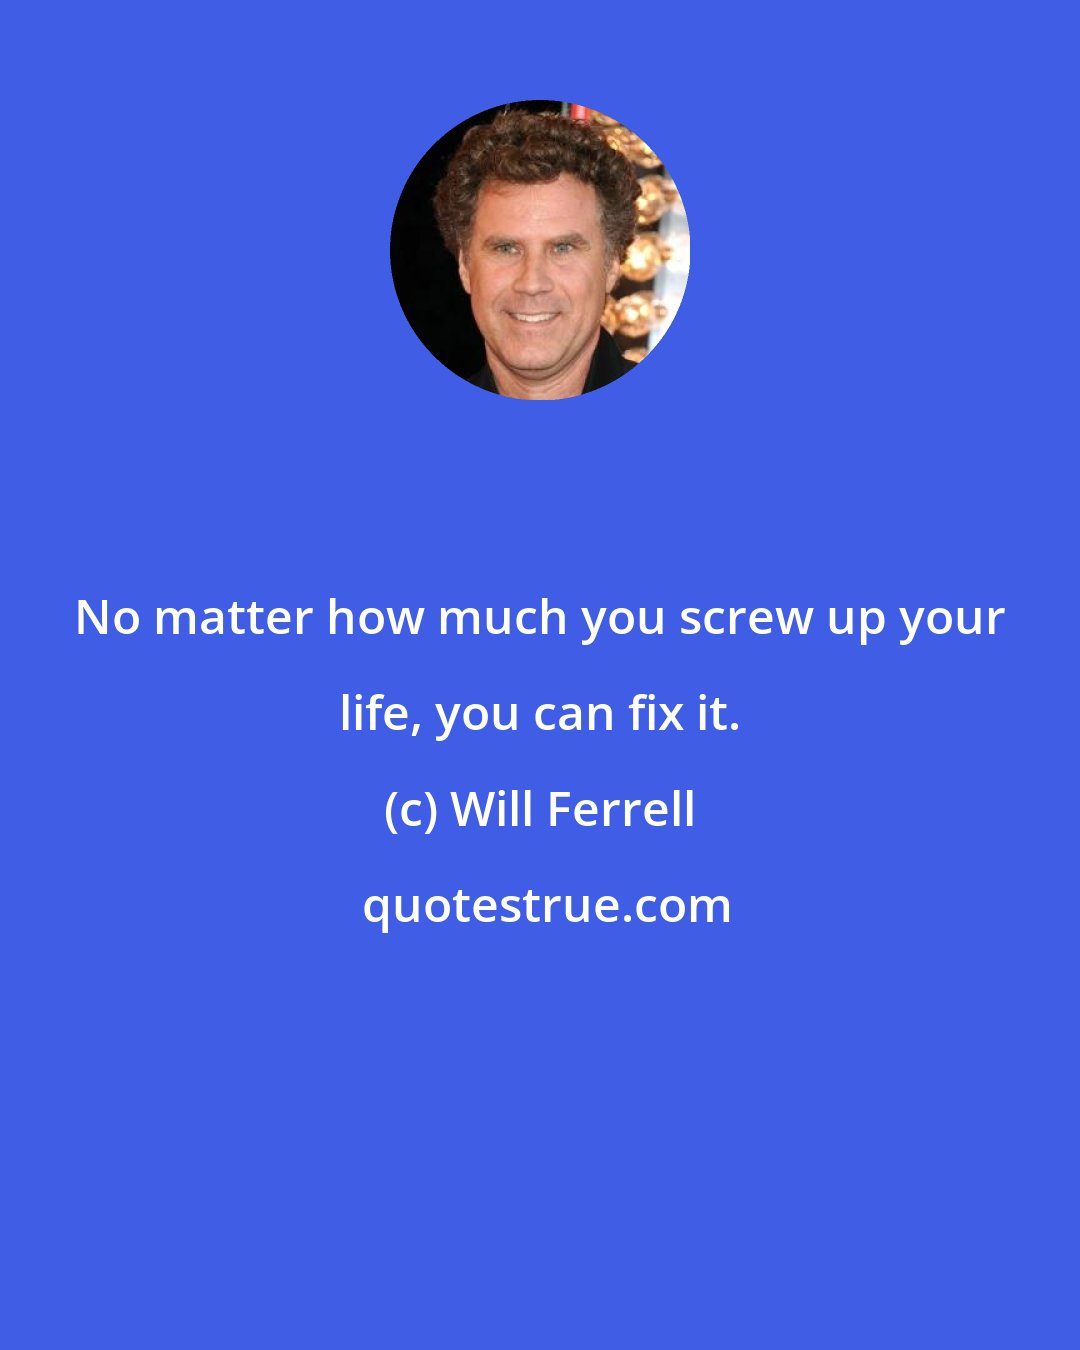 Will Ferrell: No matter how much you screw up your life, you can fix it.